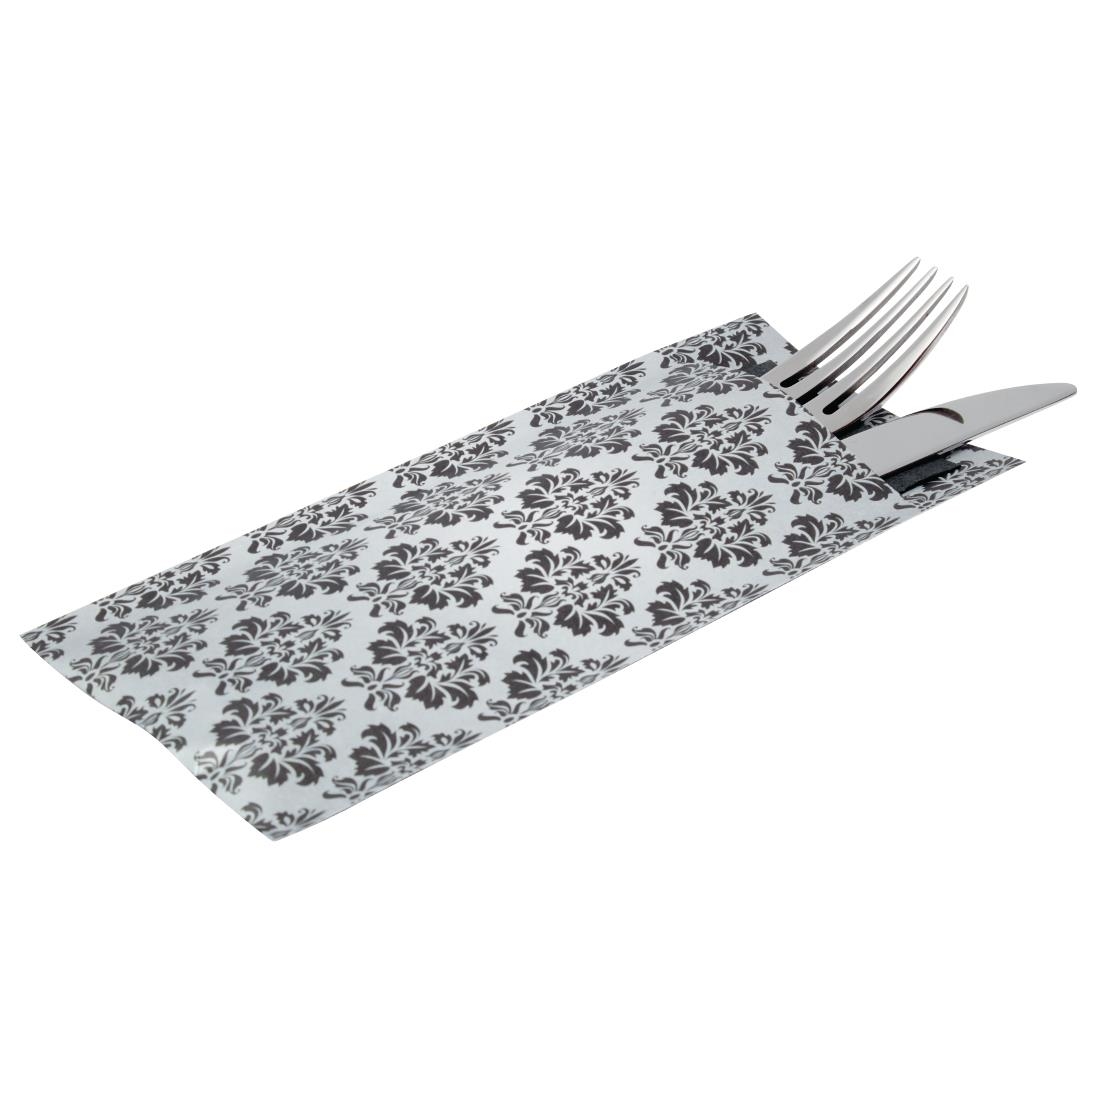 Europochette White with Vintage Design Cutlery Pouch with Black Napkin Pack of 100 (CK238)